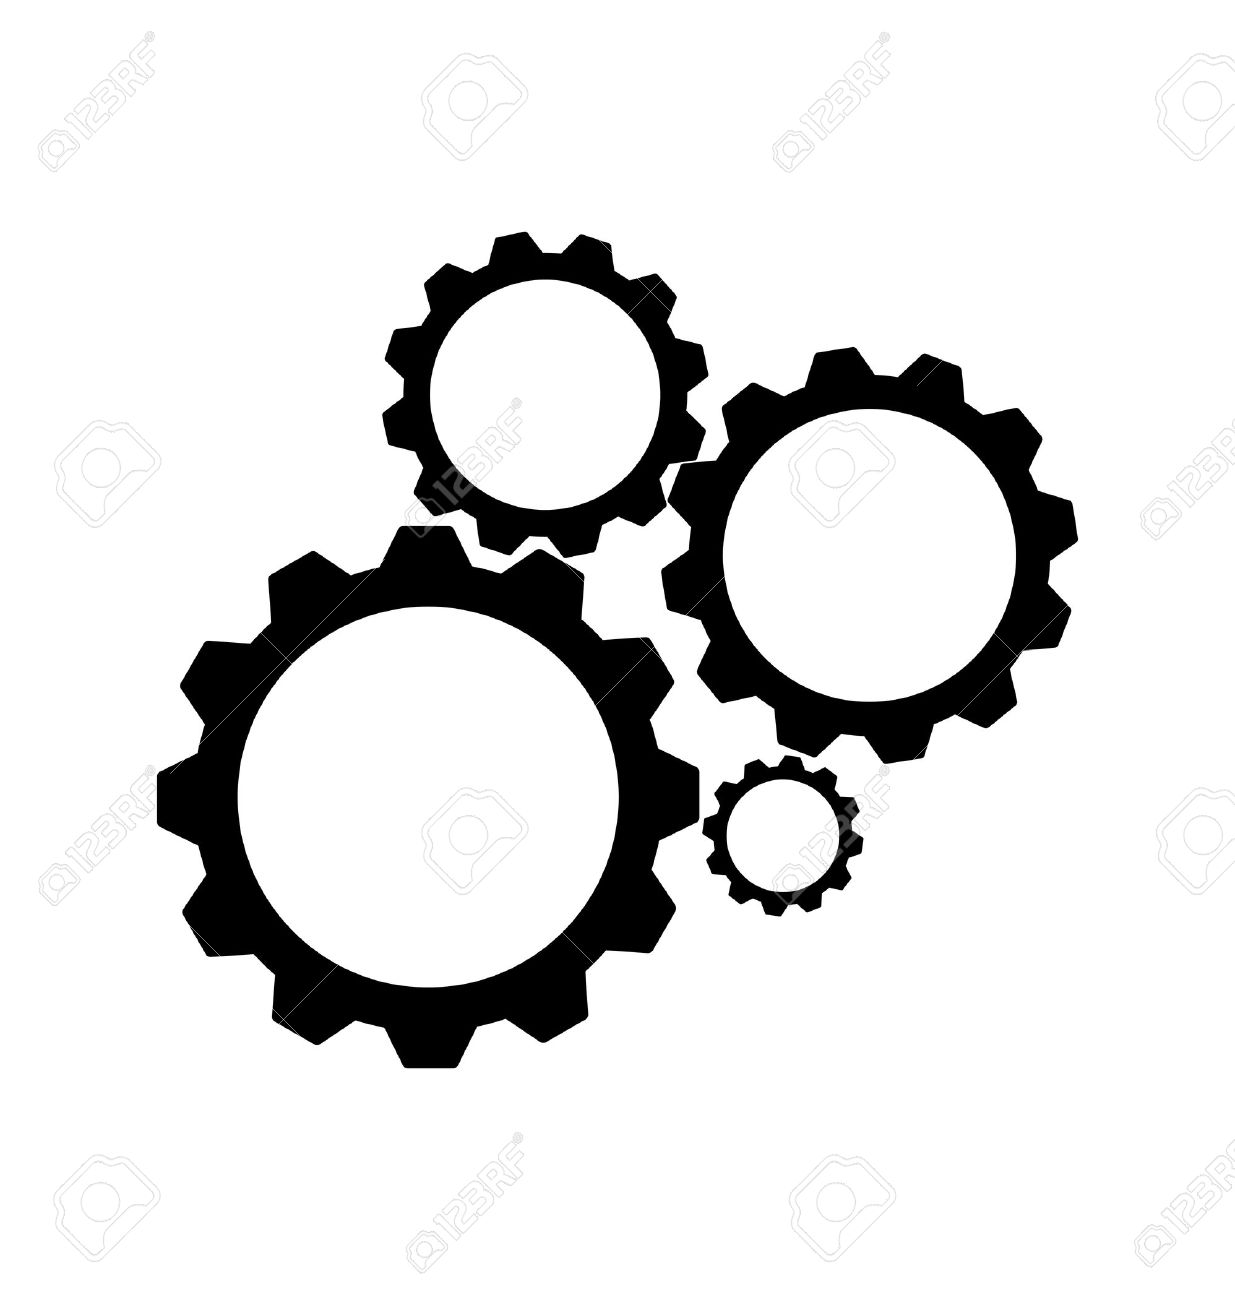 Gears clipart free.